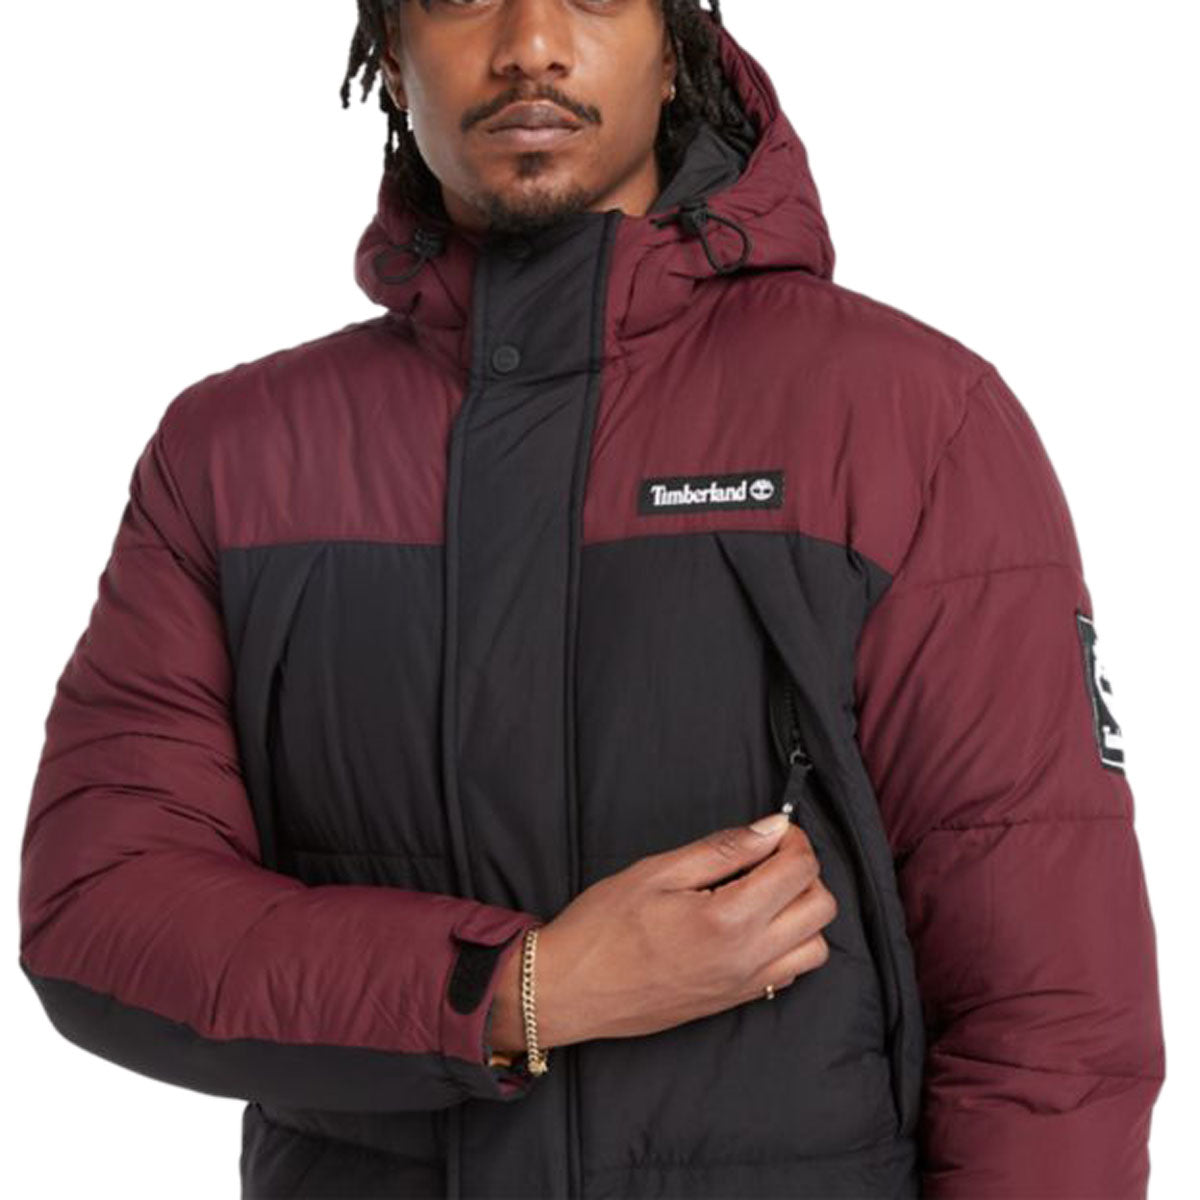 Timberland DWR Outdoor Archive Puffer Jacket - Port Royale/Black image 3